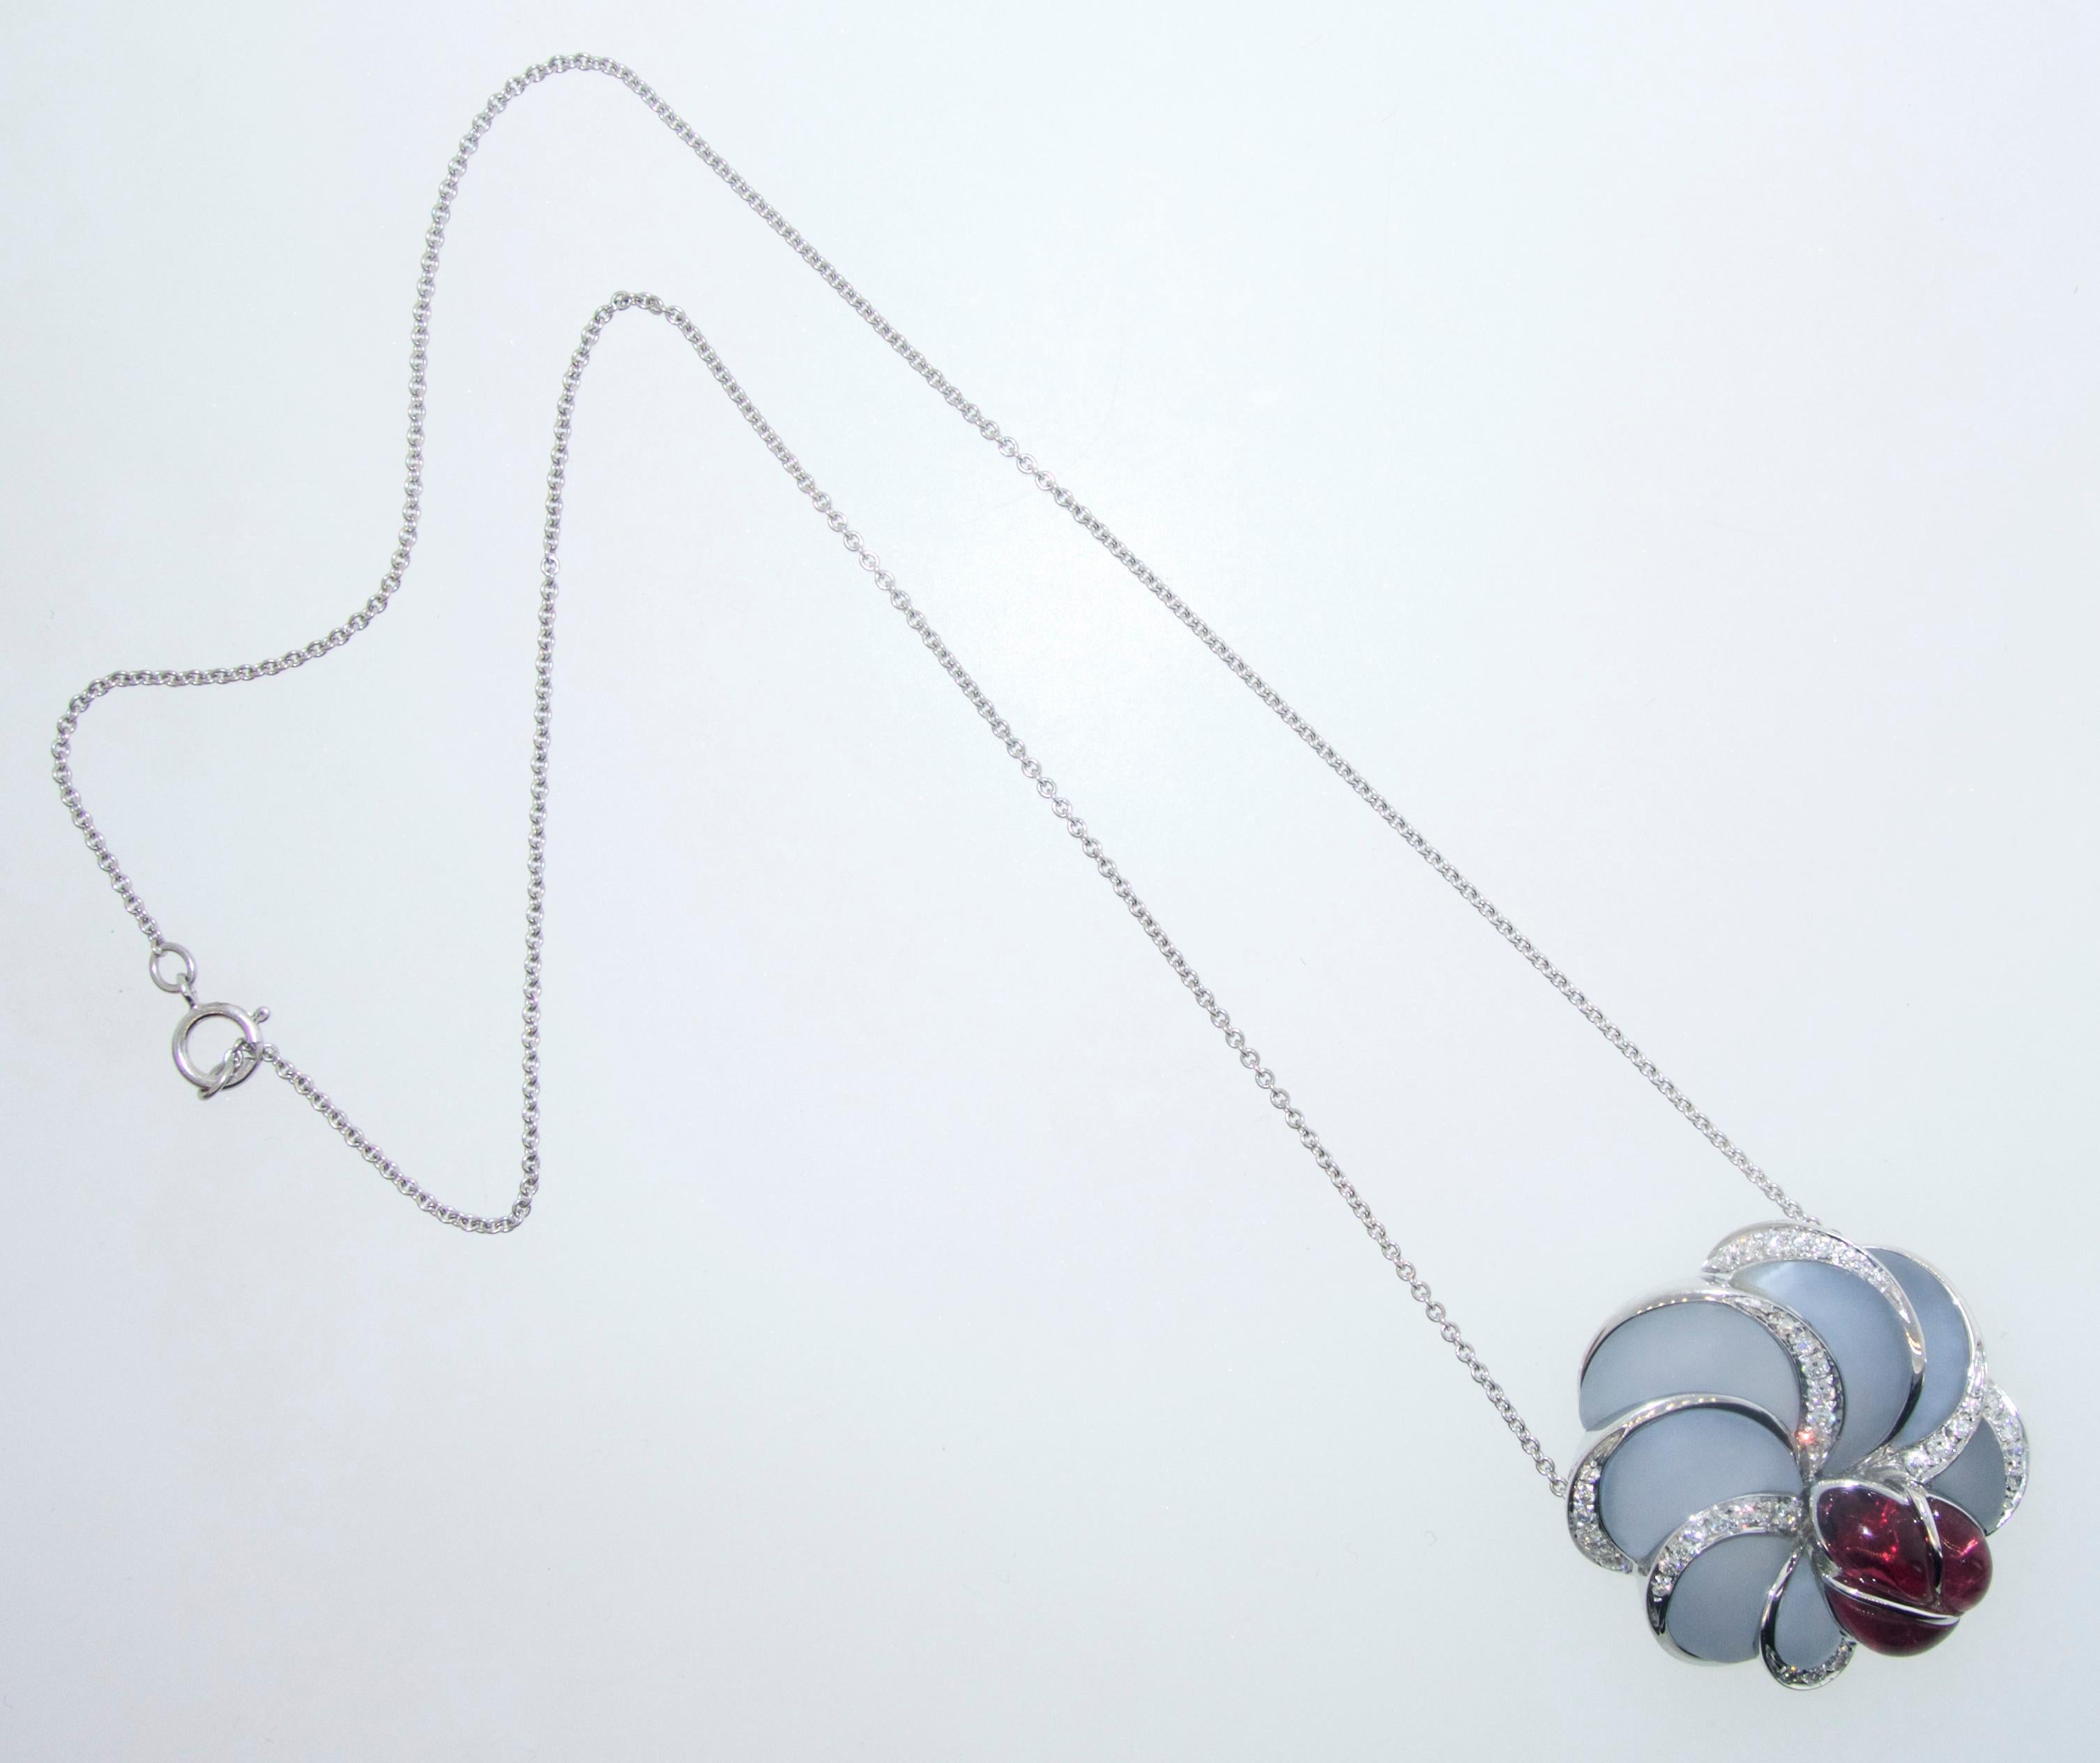 Cabochon Rubellite, Frosted Light Blue Chalcedony and Diamond Floral Motif Necklace